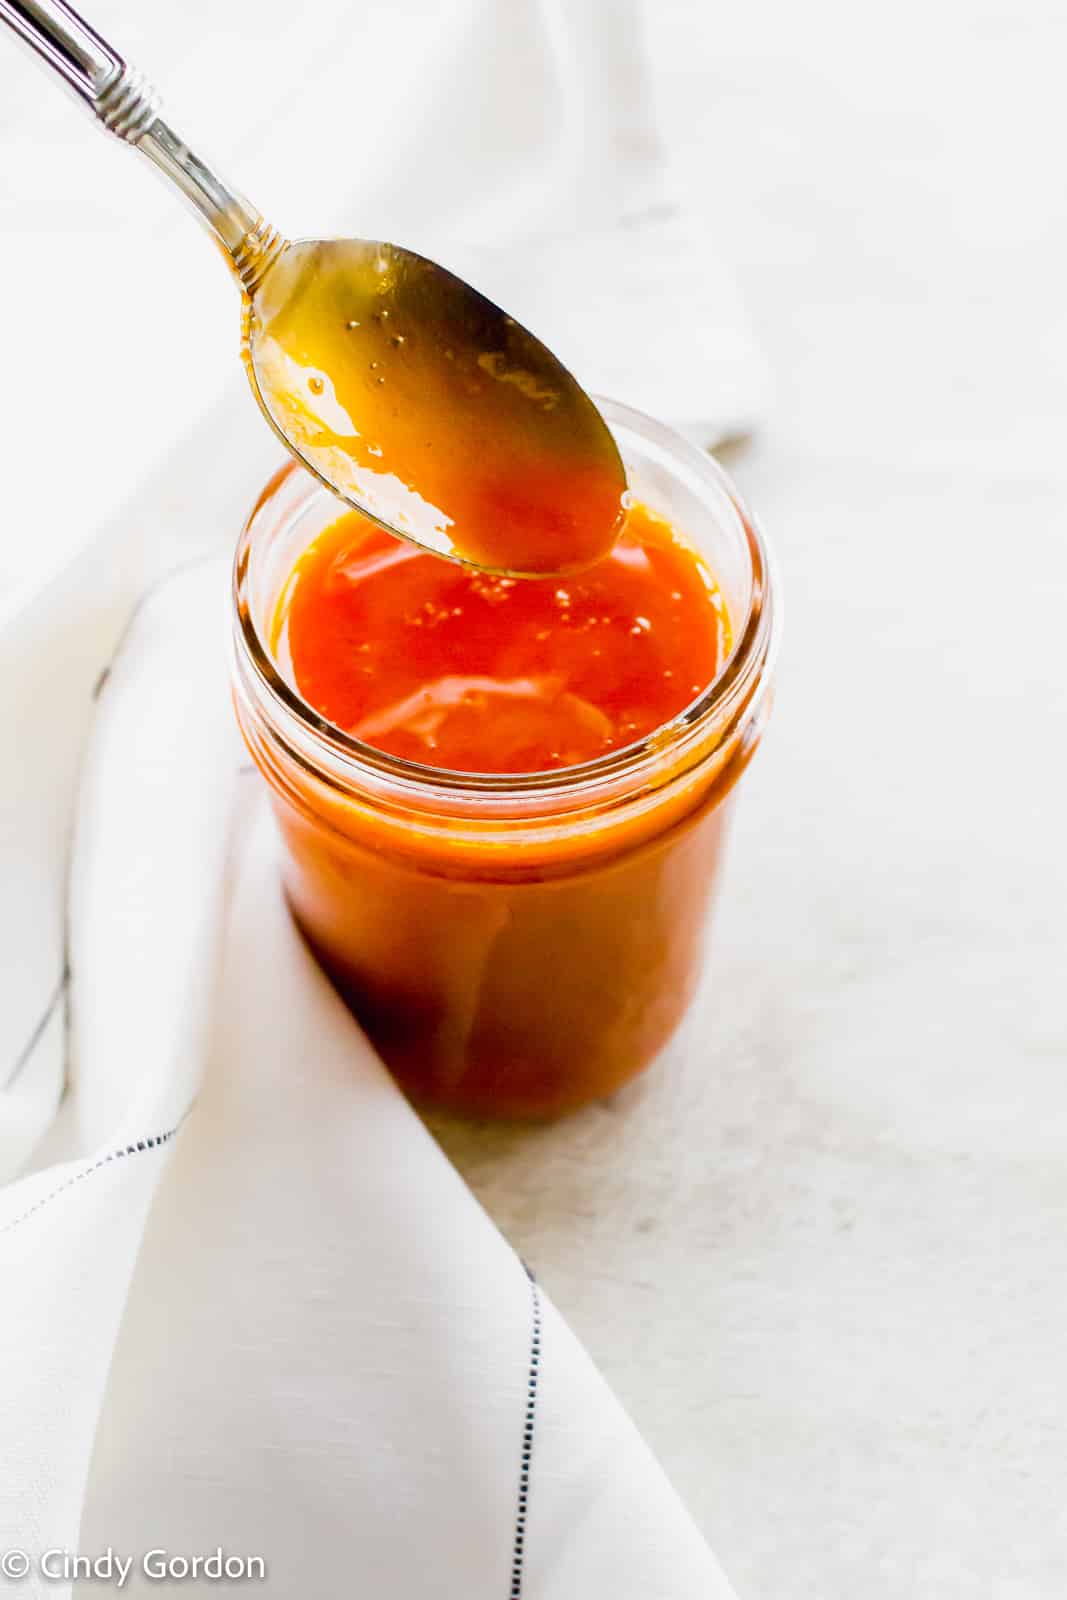 A spoon coated in Buffalo sauce over a glass jar of bright red sauce